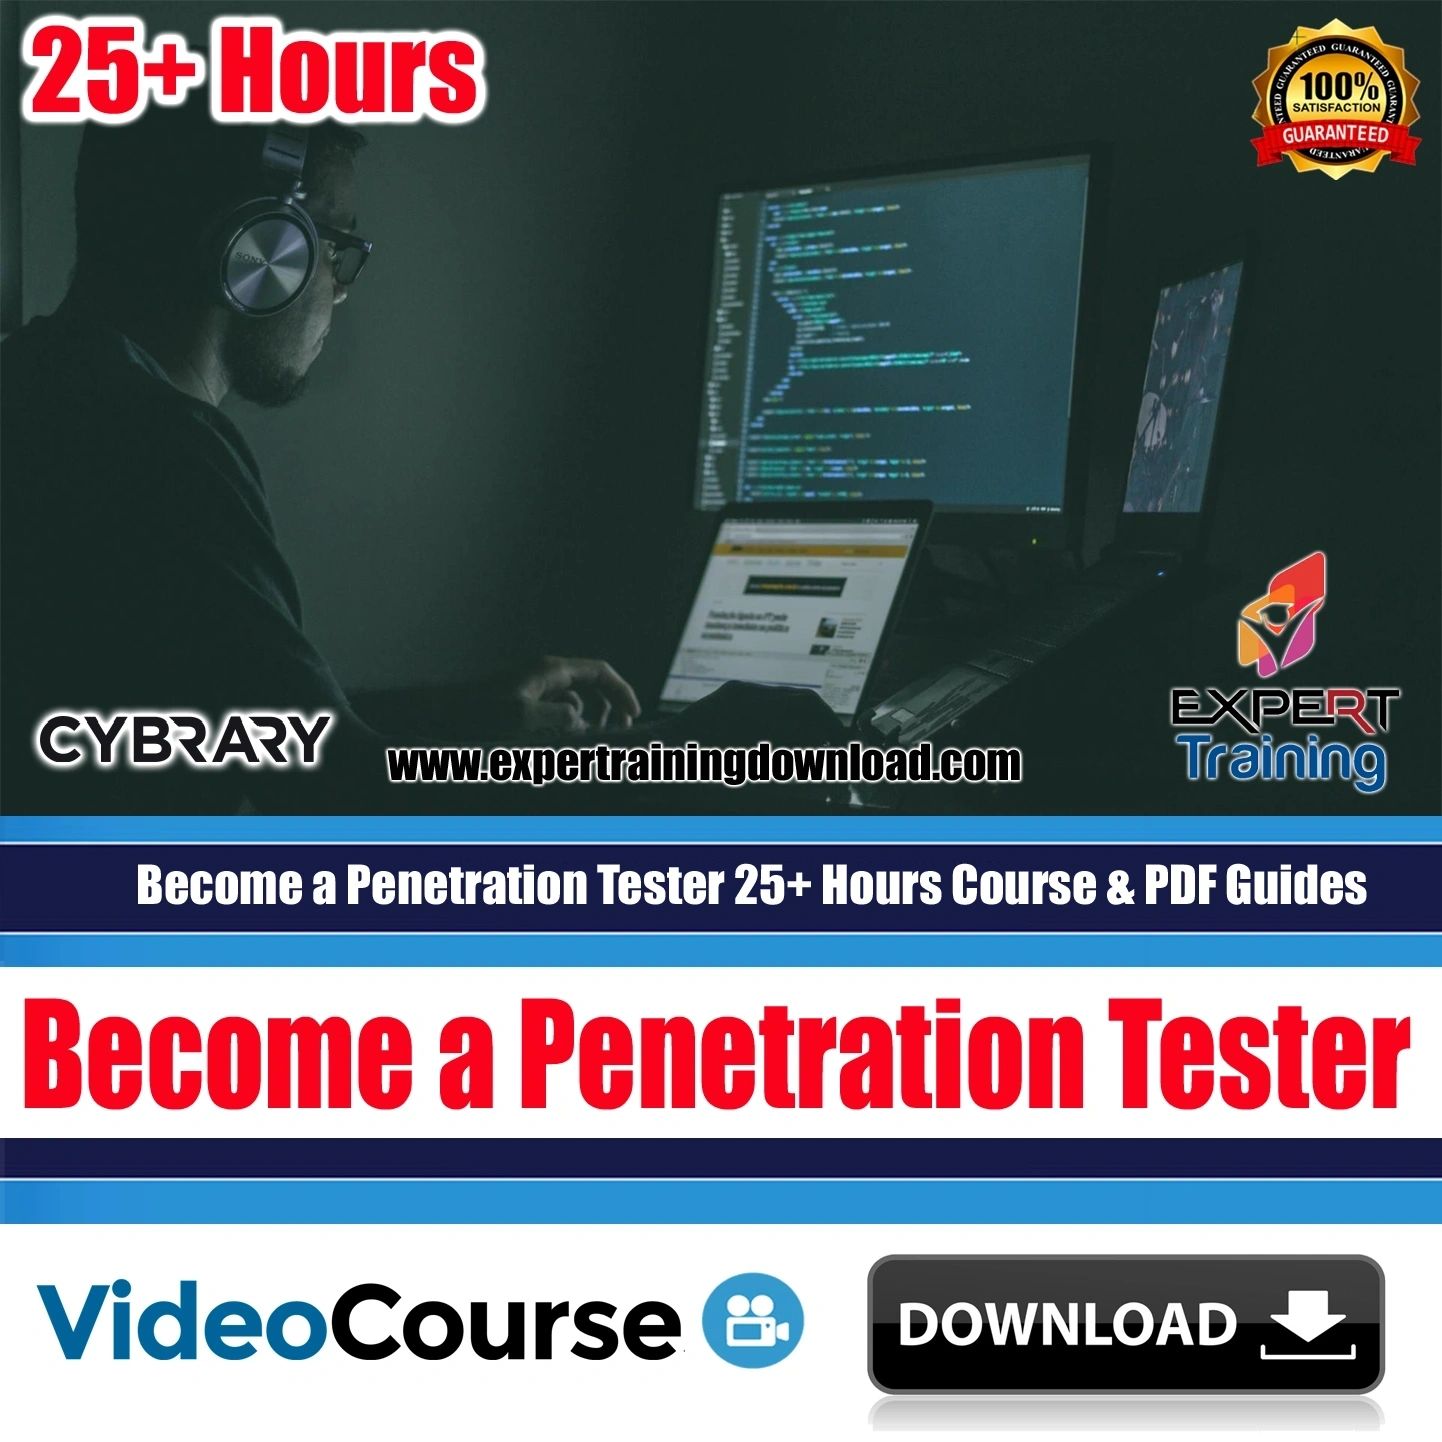 Become a Penetration Tester 25+ Hours Course & PDF Guides